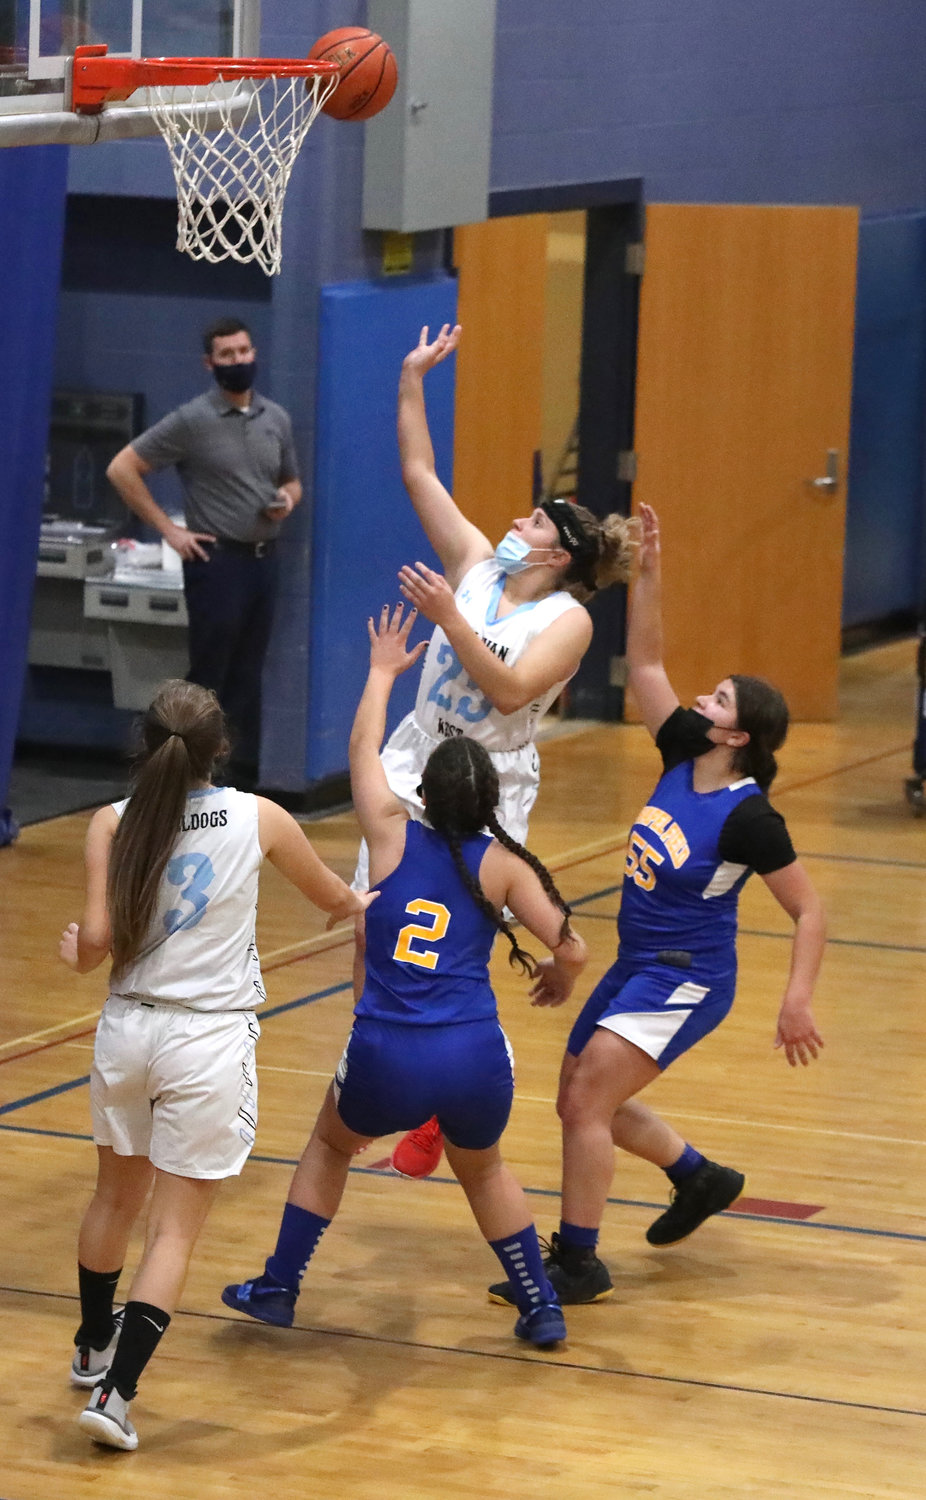 Sullivan West senior Riley Ernst goes up for two points. She led all scorers with 32 points in the Lady Westies’ convincing win over Chapel Field.